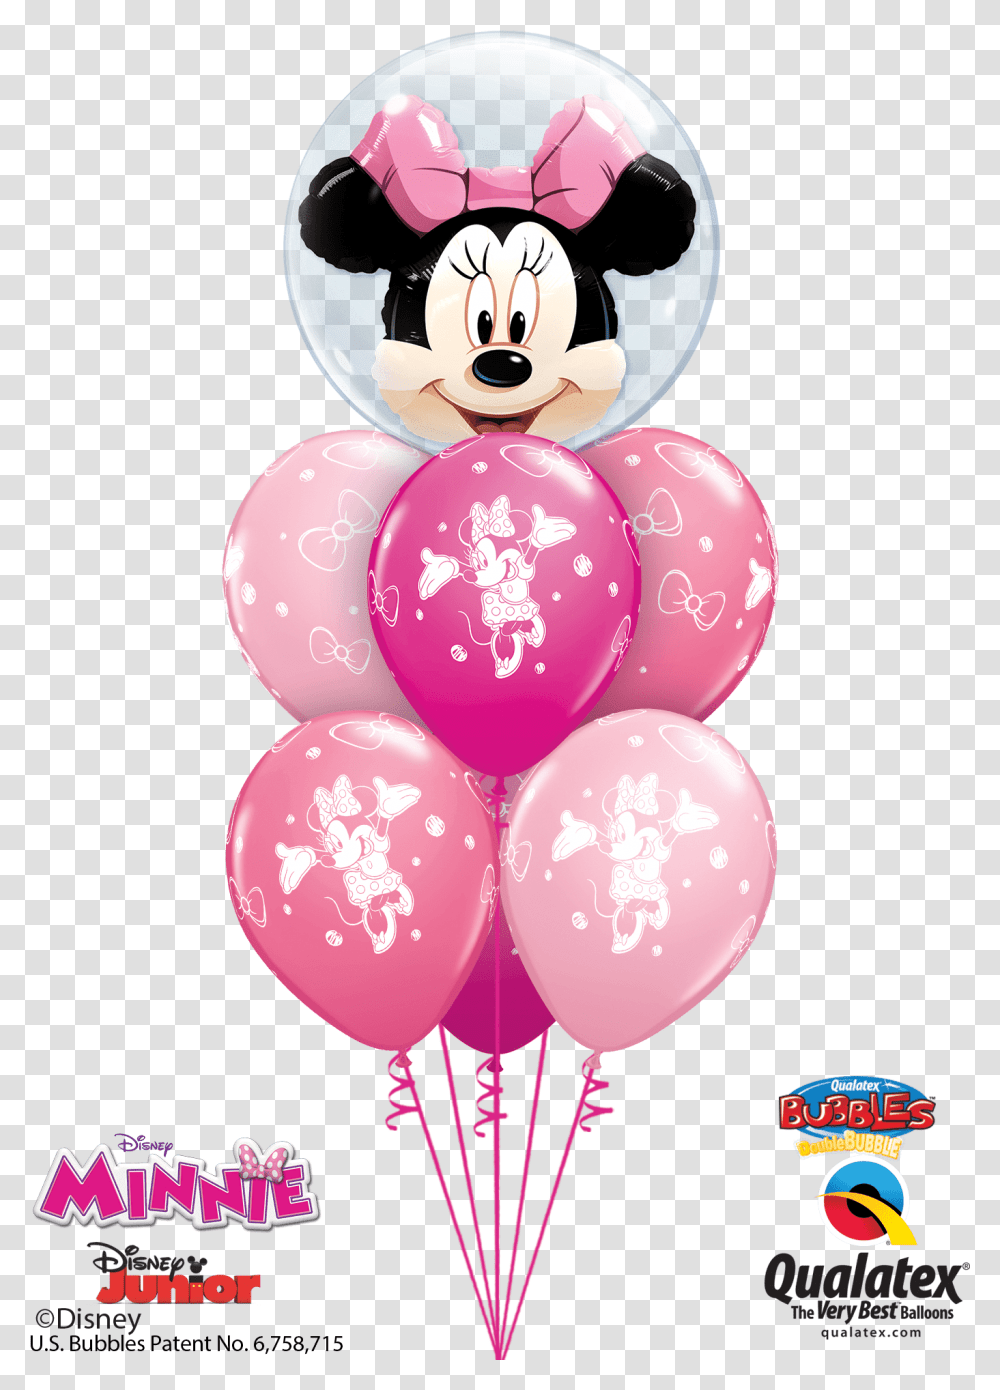 Pink Minnie Mouse Minnie Mouse Balloons Hd Birthday Cake Balloon Bouquet, Sweets Transparent Png